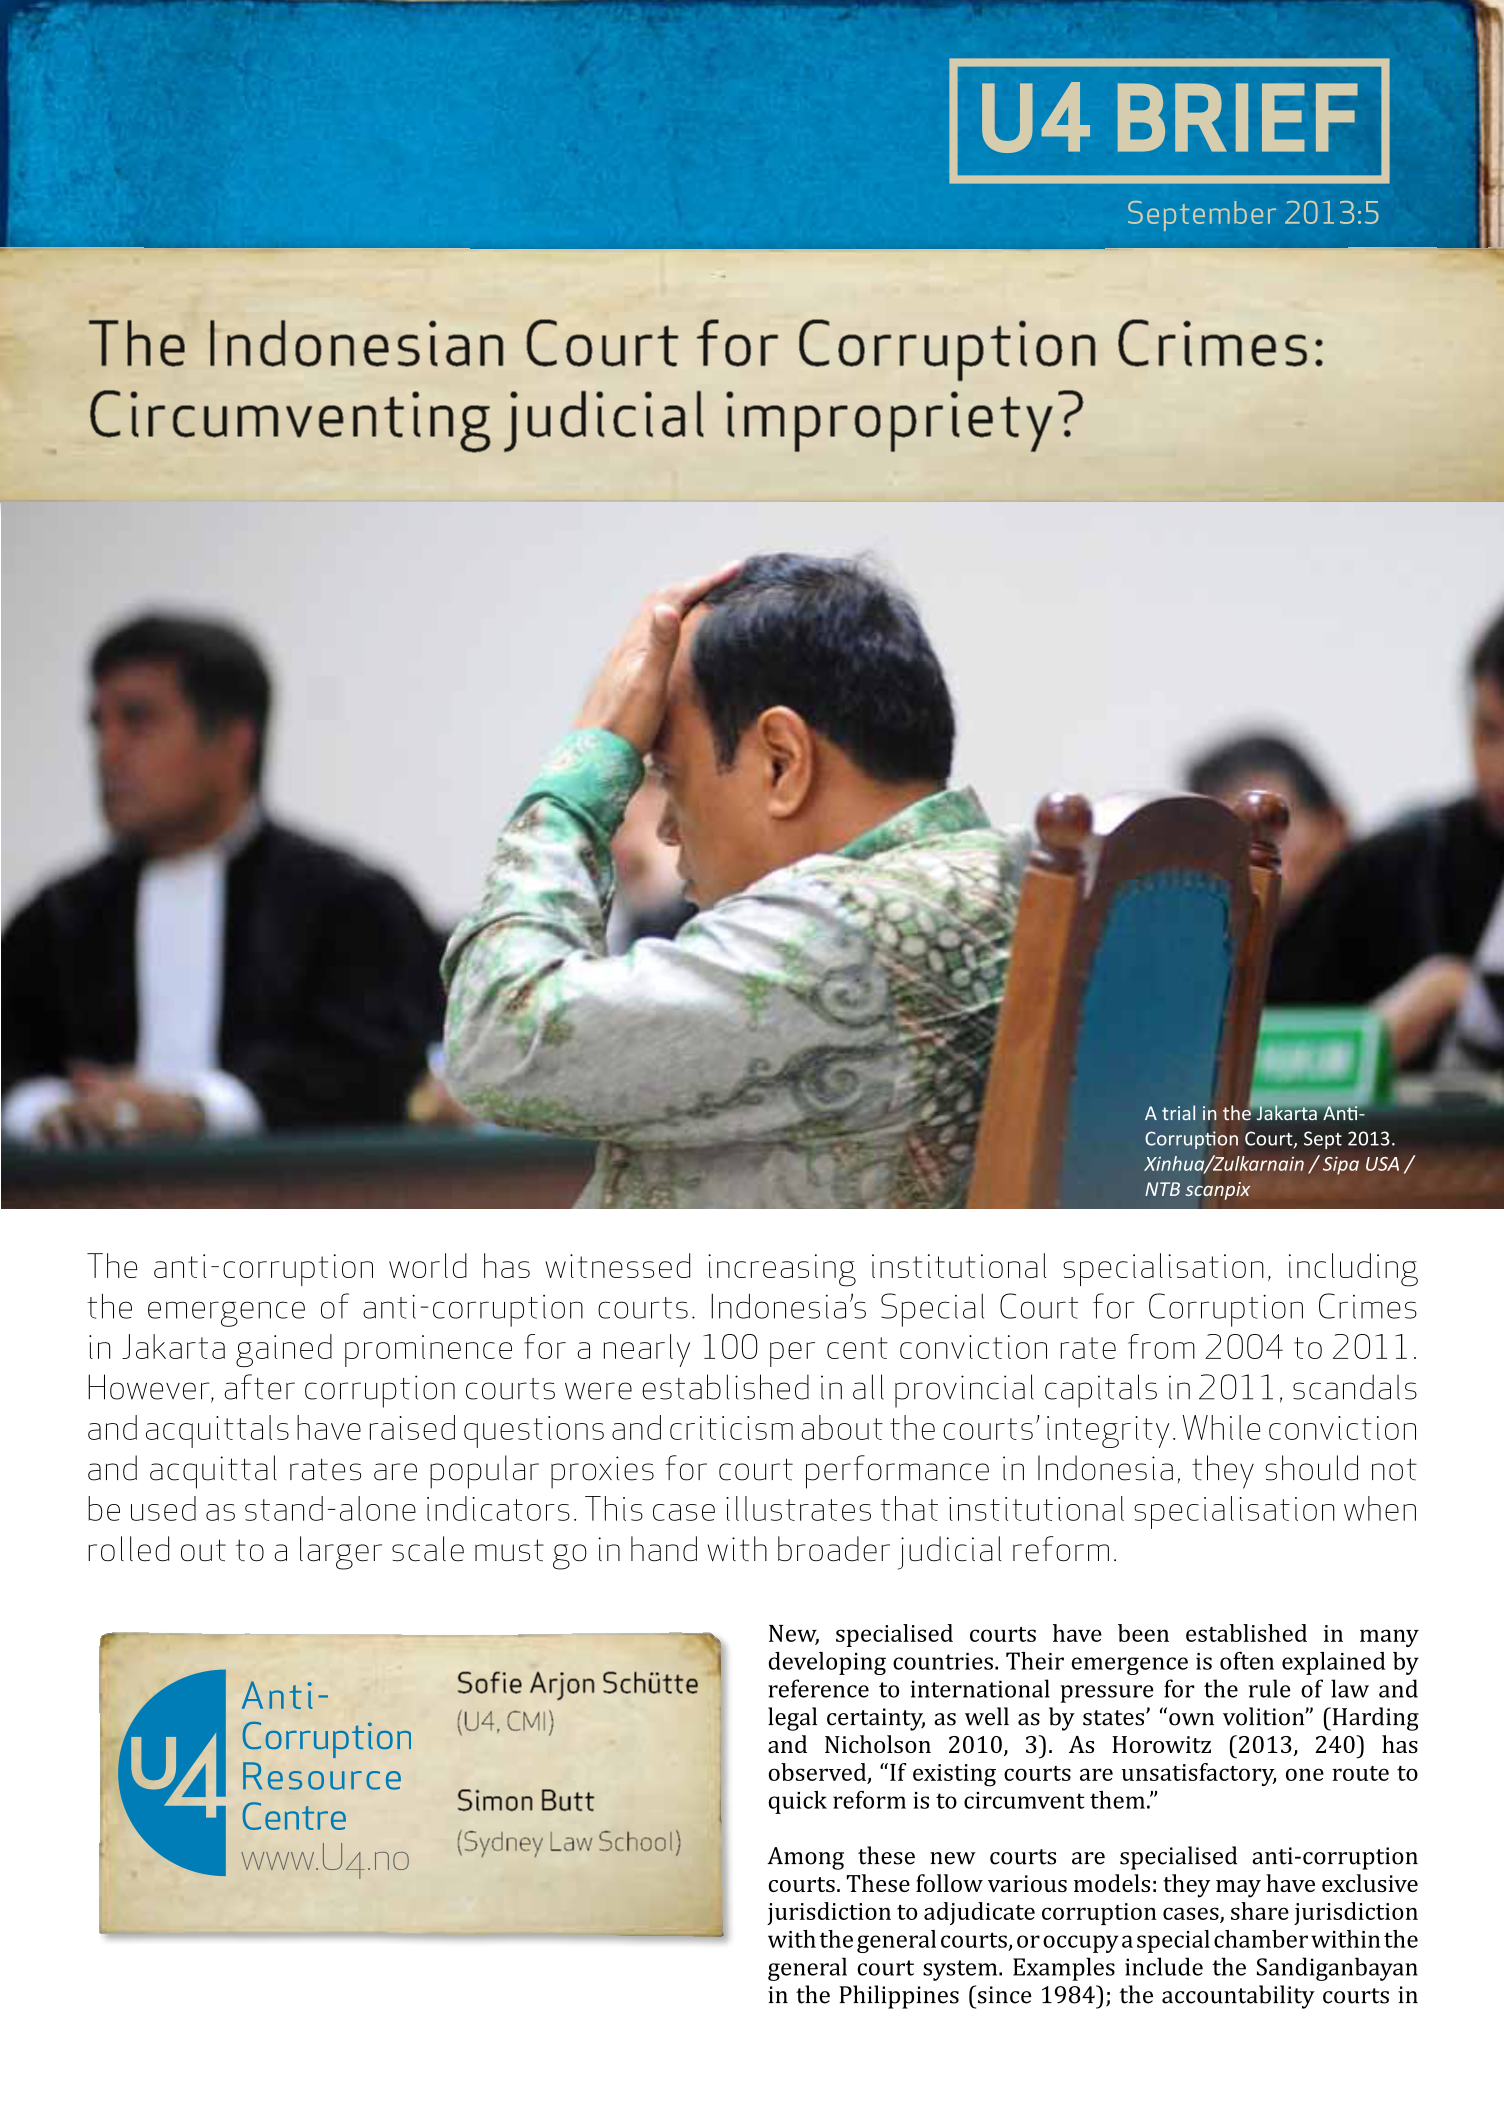 The Indonesian Court for Corruption Crimes: Circumventing judicial impropriety?